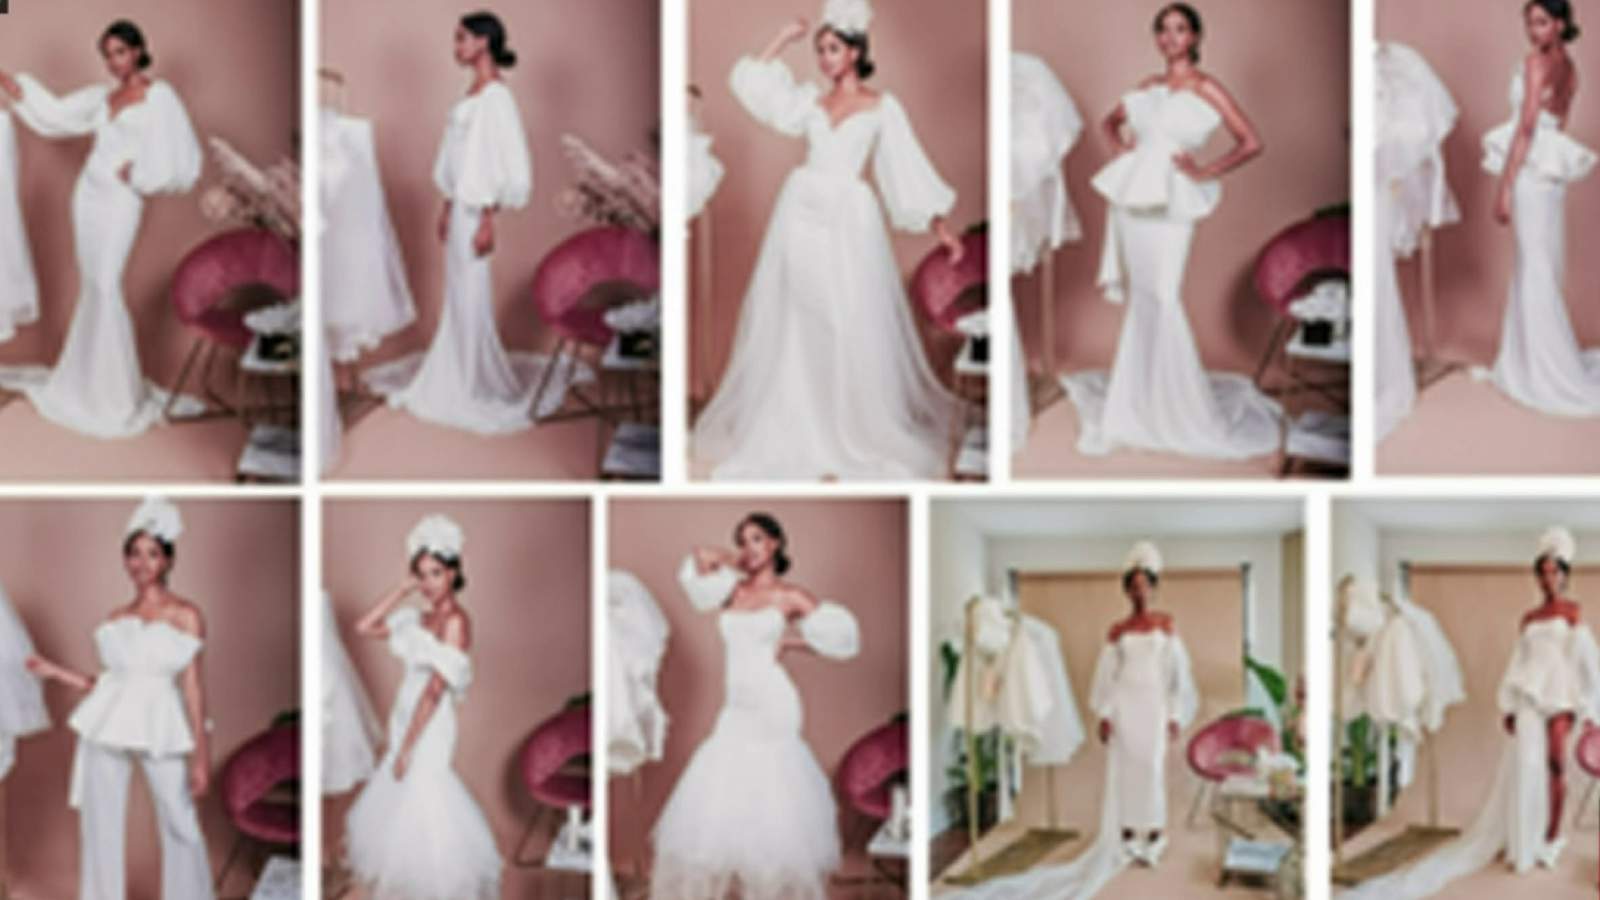 Get the perfect wedding dress that changes into multiple styles